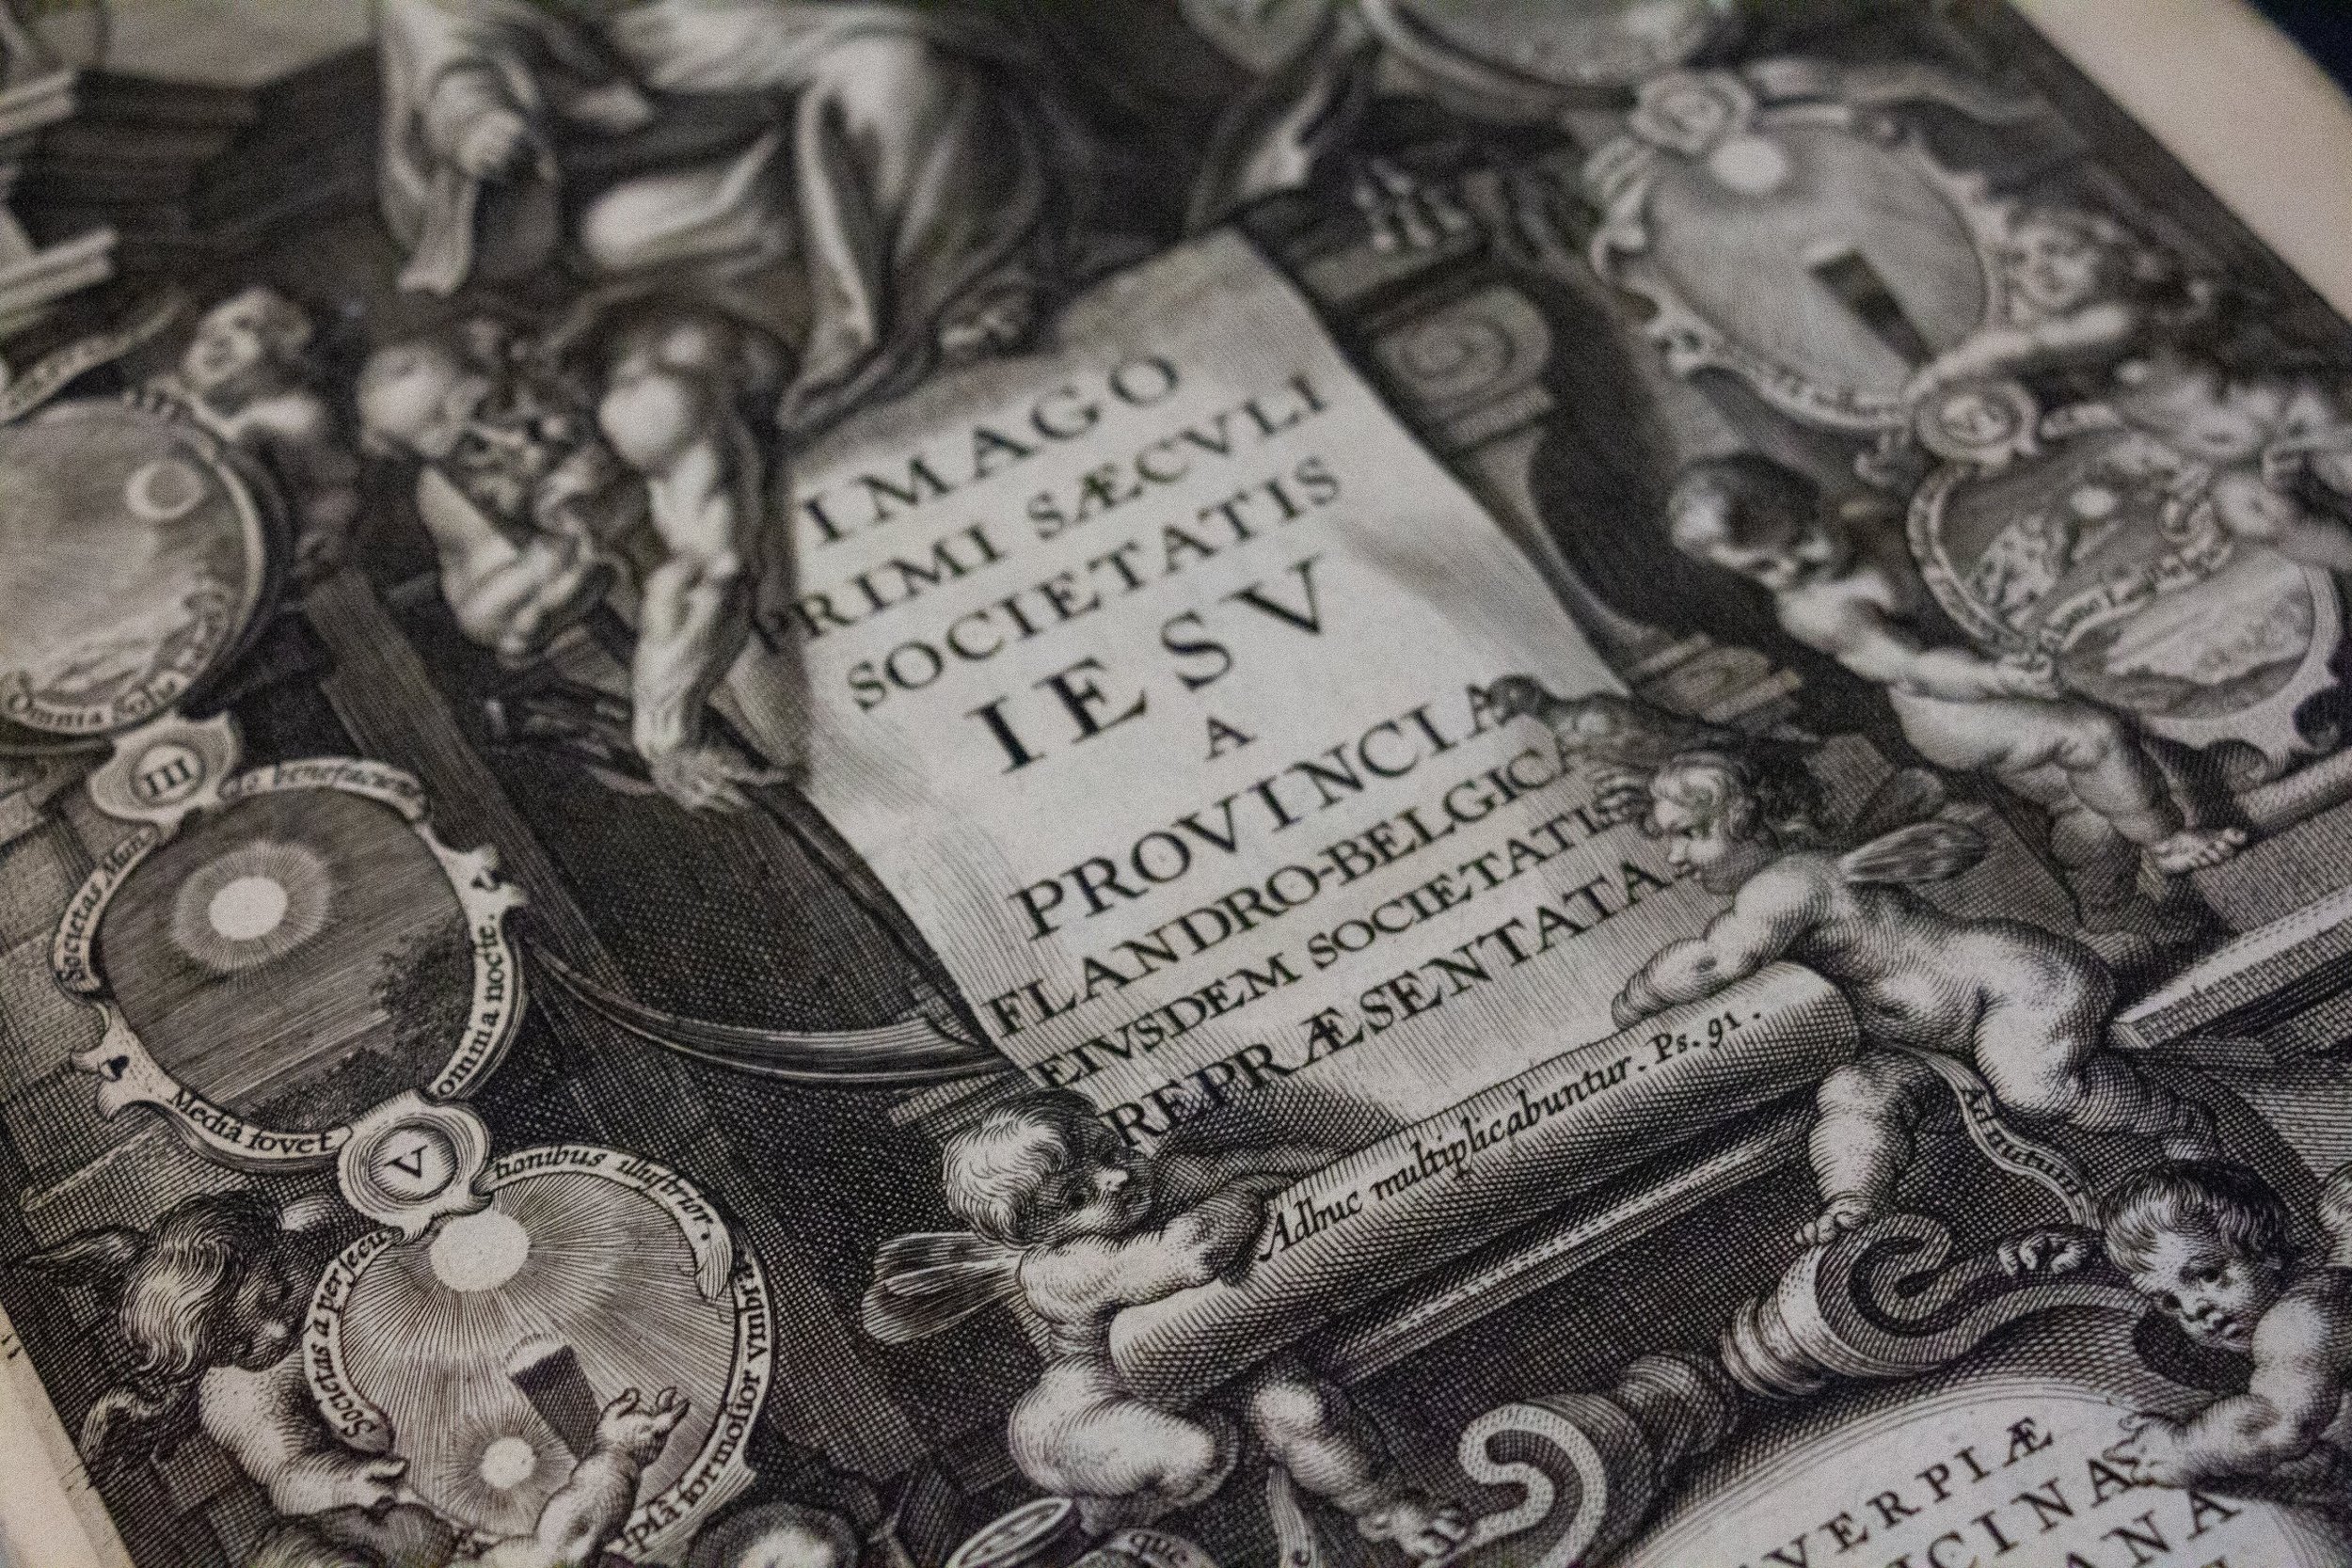 Images from Plantin-Moretus Museum Archive